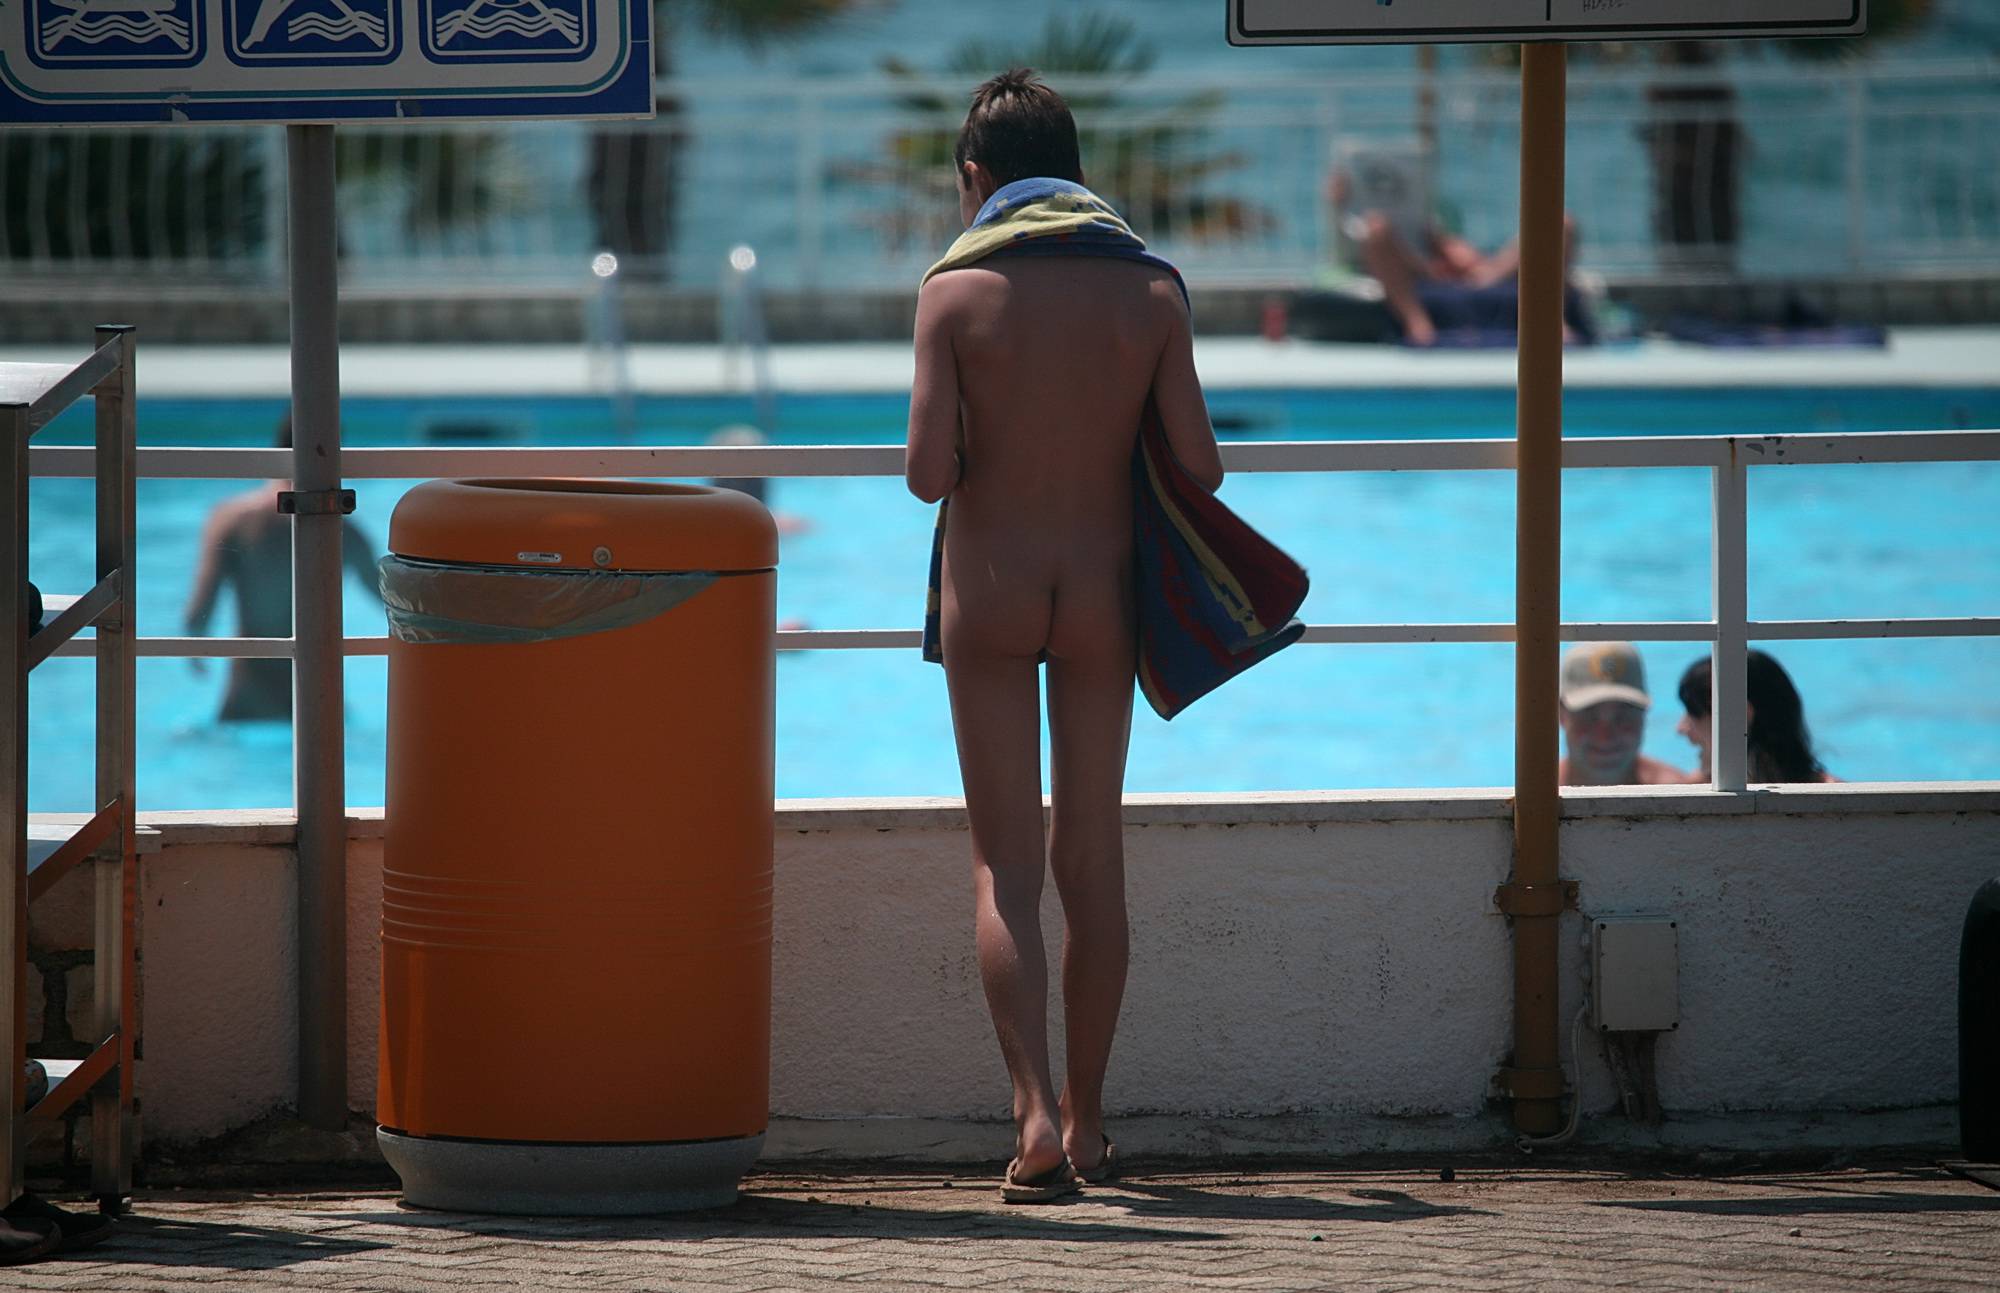 Pure Nudism Images-Walking By The Pool Area - 1